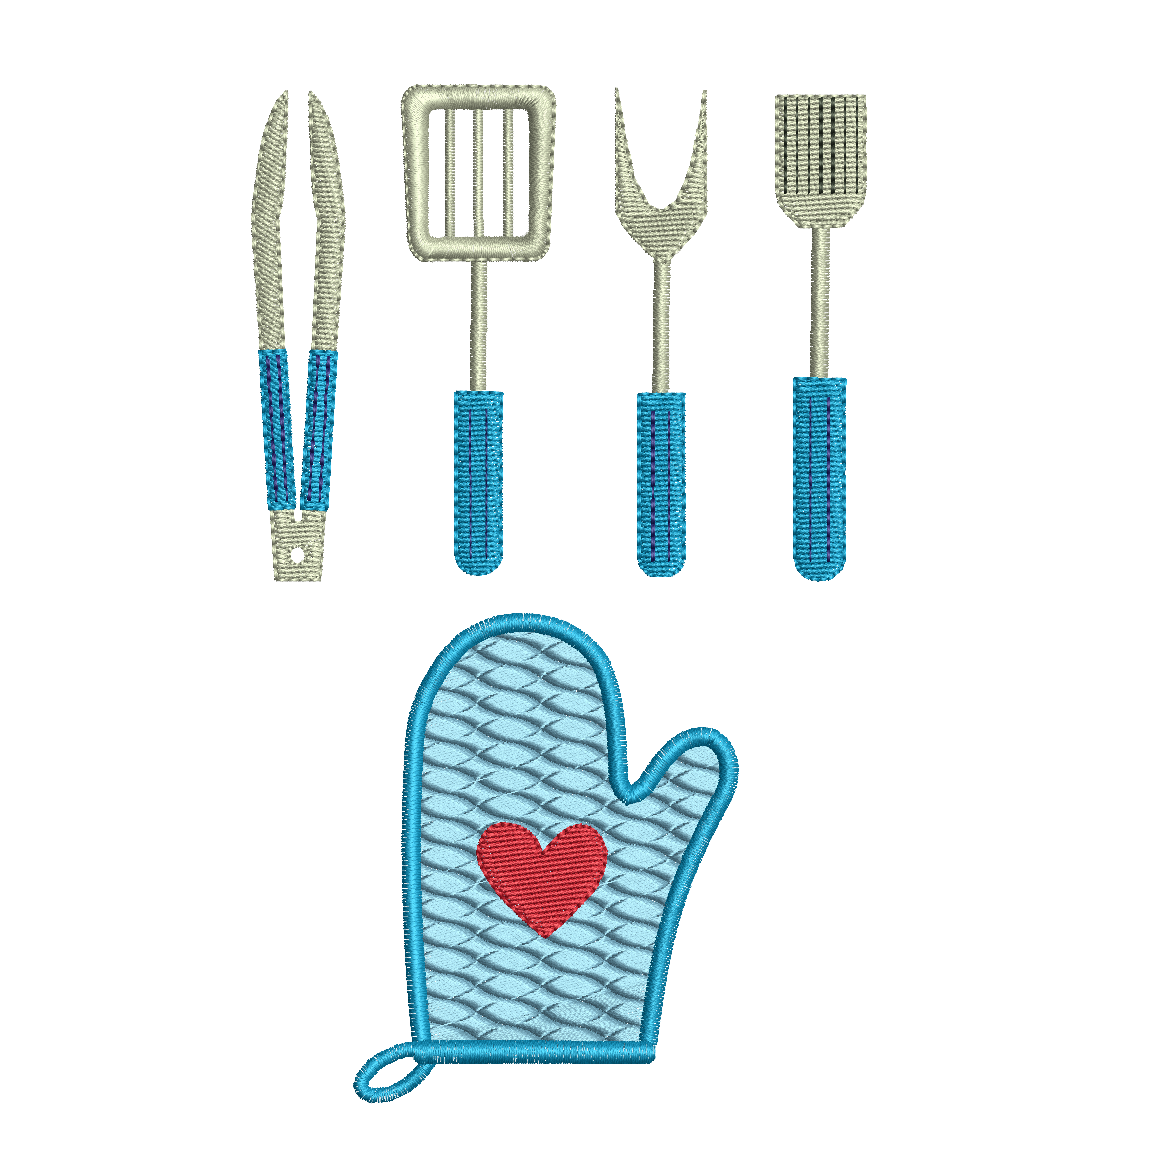 Mini kitchen utensils set of machine embroidery designs by embroiderytree.com